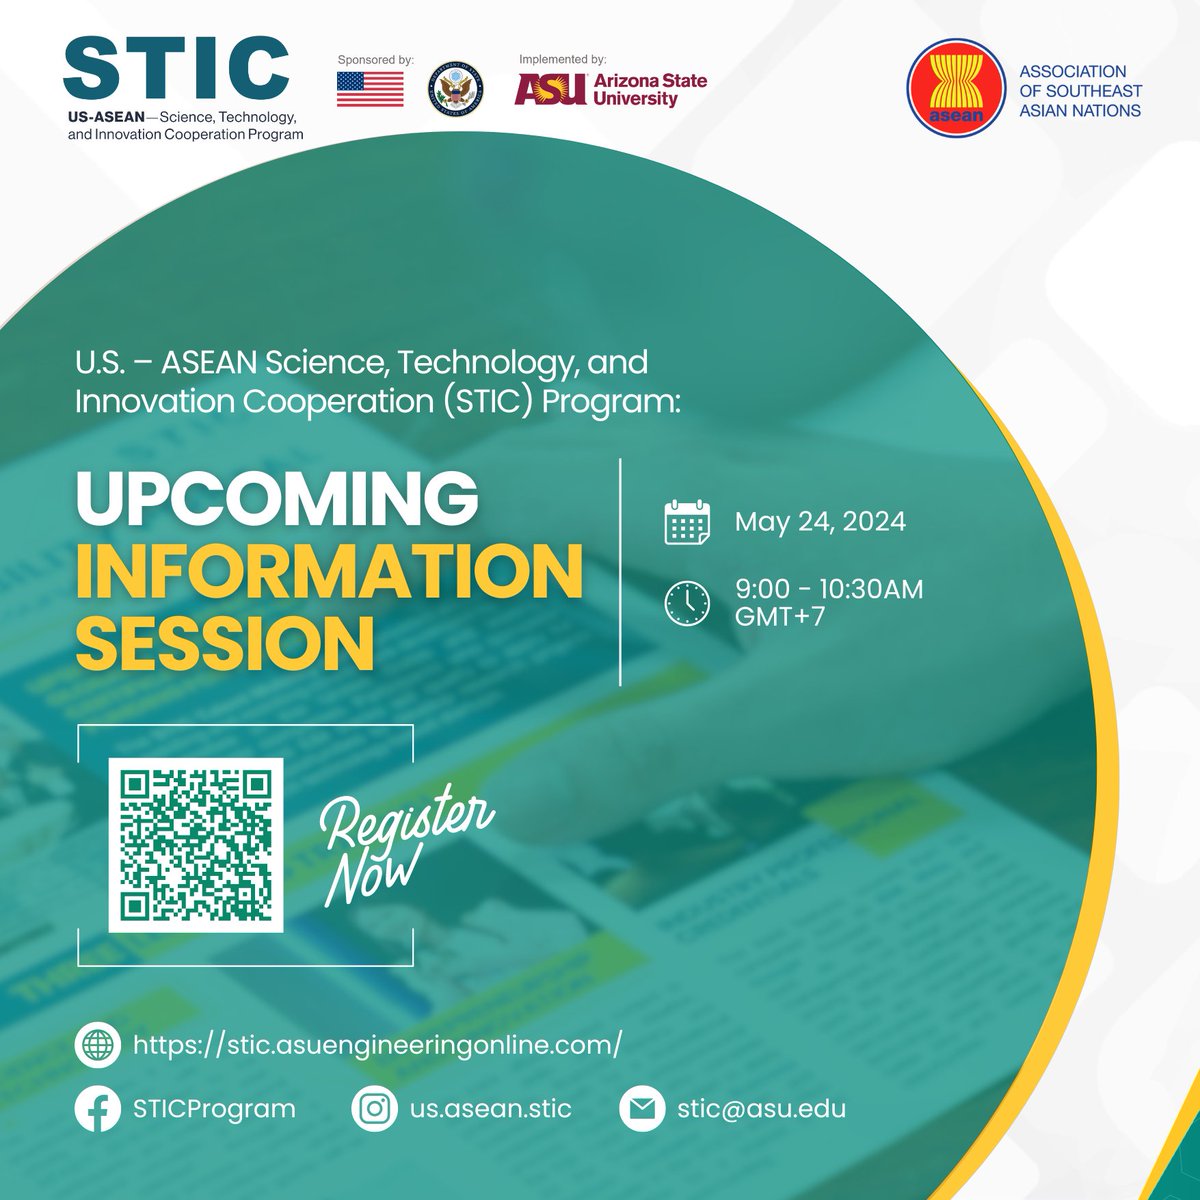 The U.S. – ASEAN Science, Technology, and Innovation Cooperation (STIC) Program is hosting an information-sharing session about its program and seed grants on May 24, 2024, from 9:00 - 10:30 AM (GMT+7). STIC's online-learning platform provides learning opportunities for all